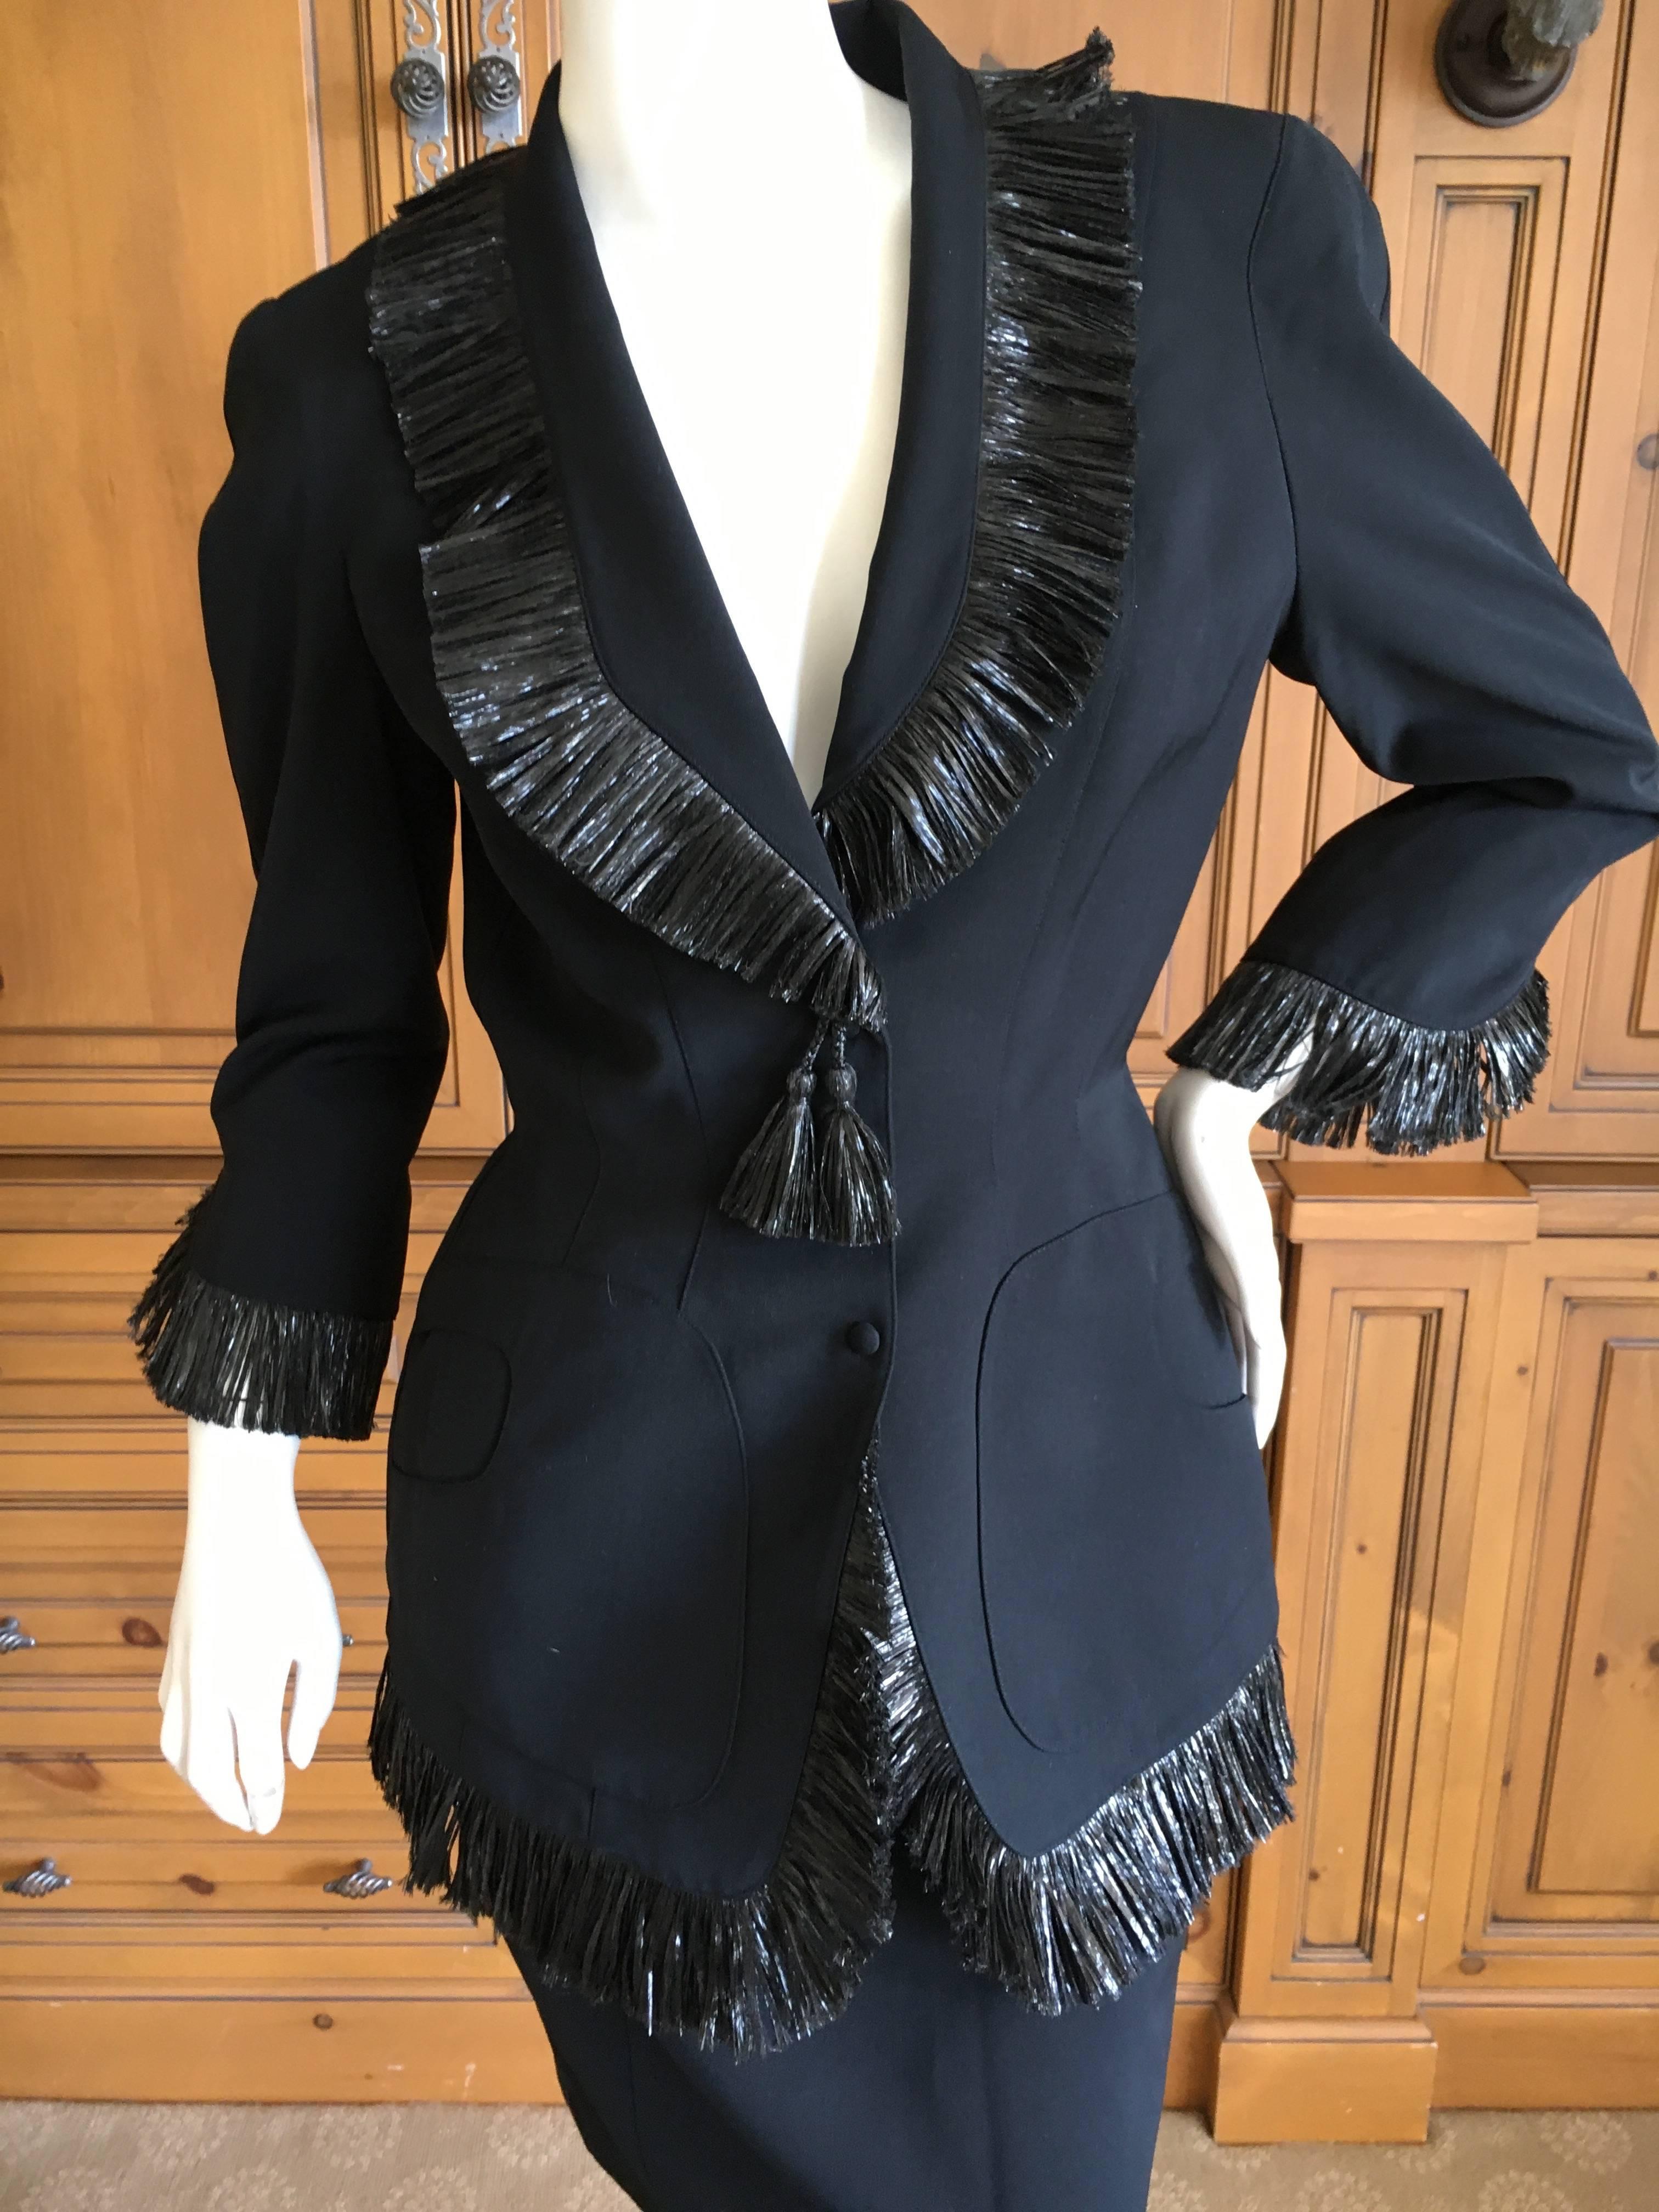 Thierry Mugler Vintage 1980's Black Suit with Raffia Fringe Tassel and Trim .
Classic Mugler from the eighties. 
Featuring a jacket and skirt.
Size 38
Jacket 
Bust 38"
Was it 28"
Length 28"
Skirt
Was it 26"
Hips 34"
Length